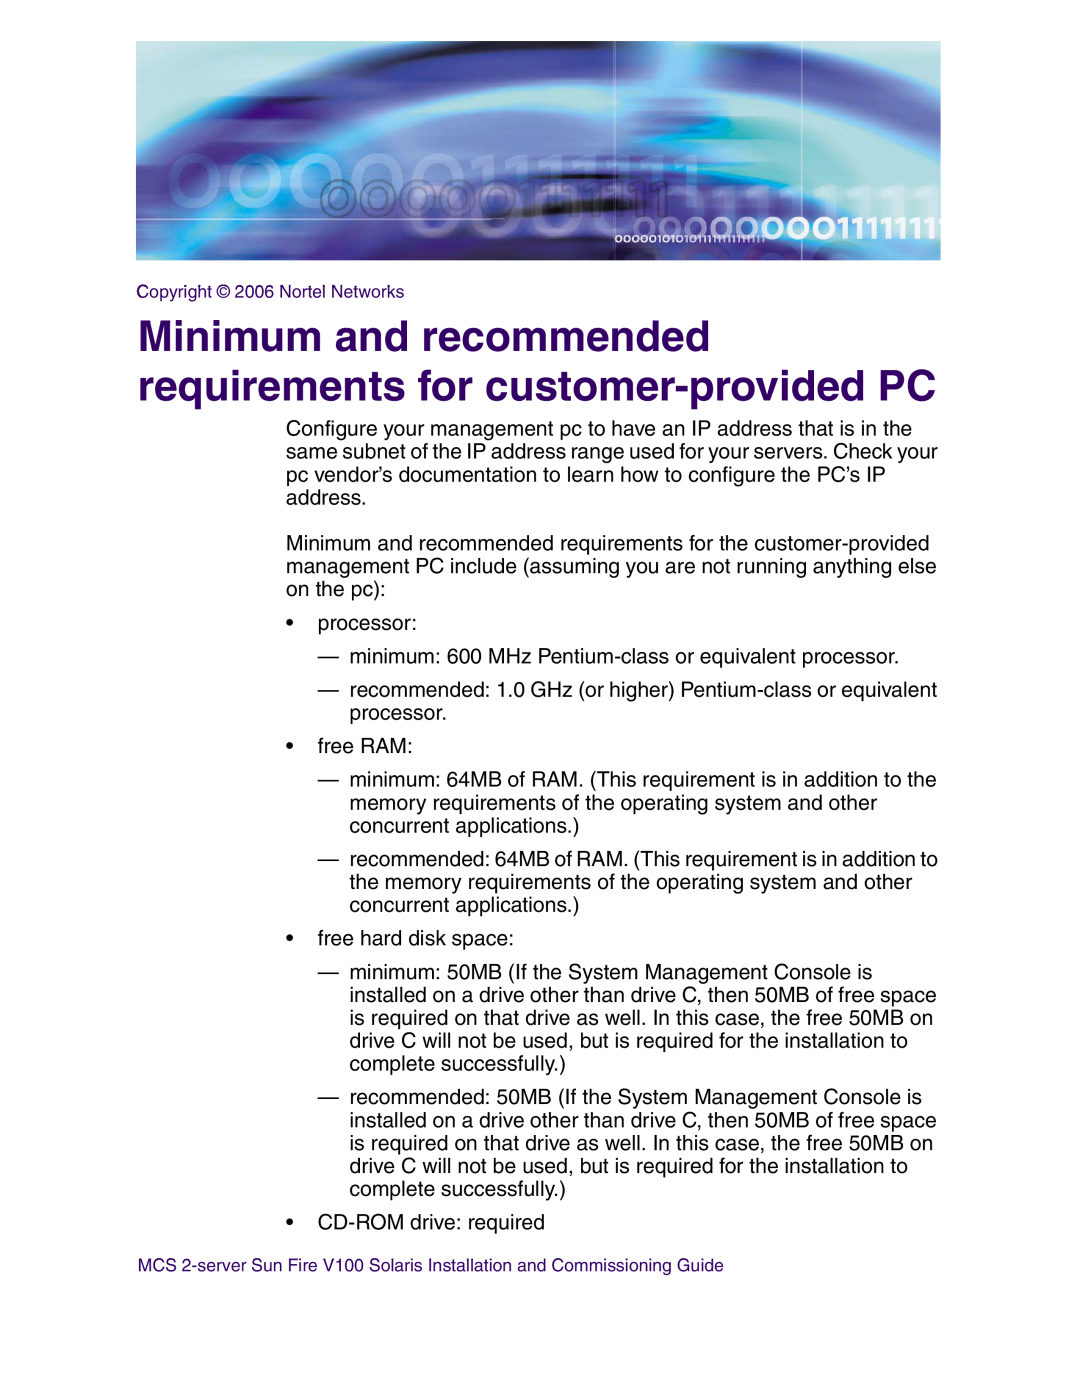 Nortel Networks V100 manual Minimum and recommended requirements for customer-provided PC 